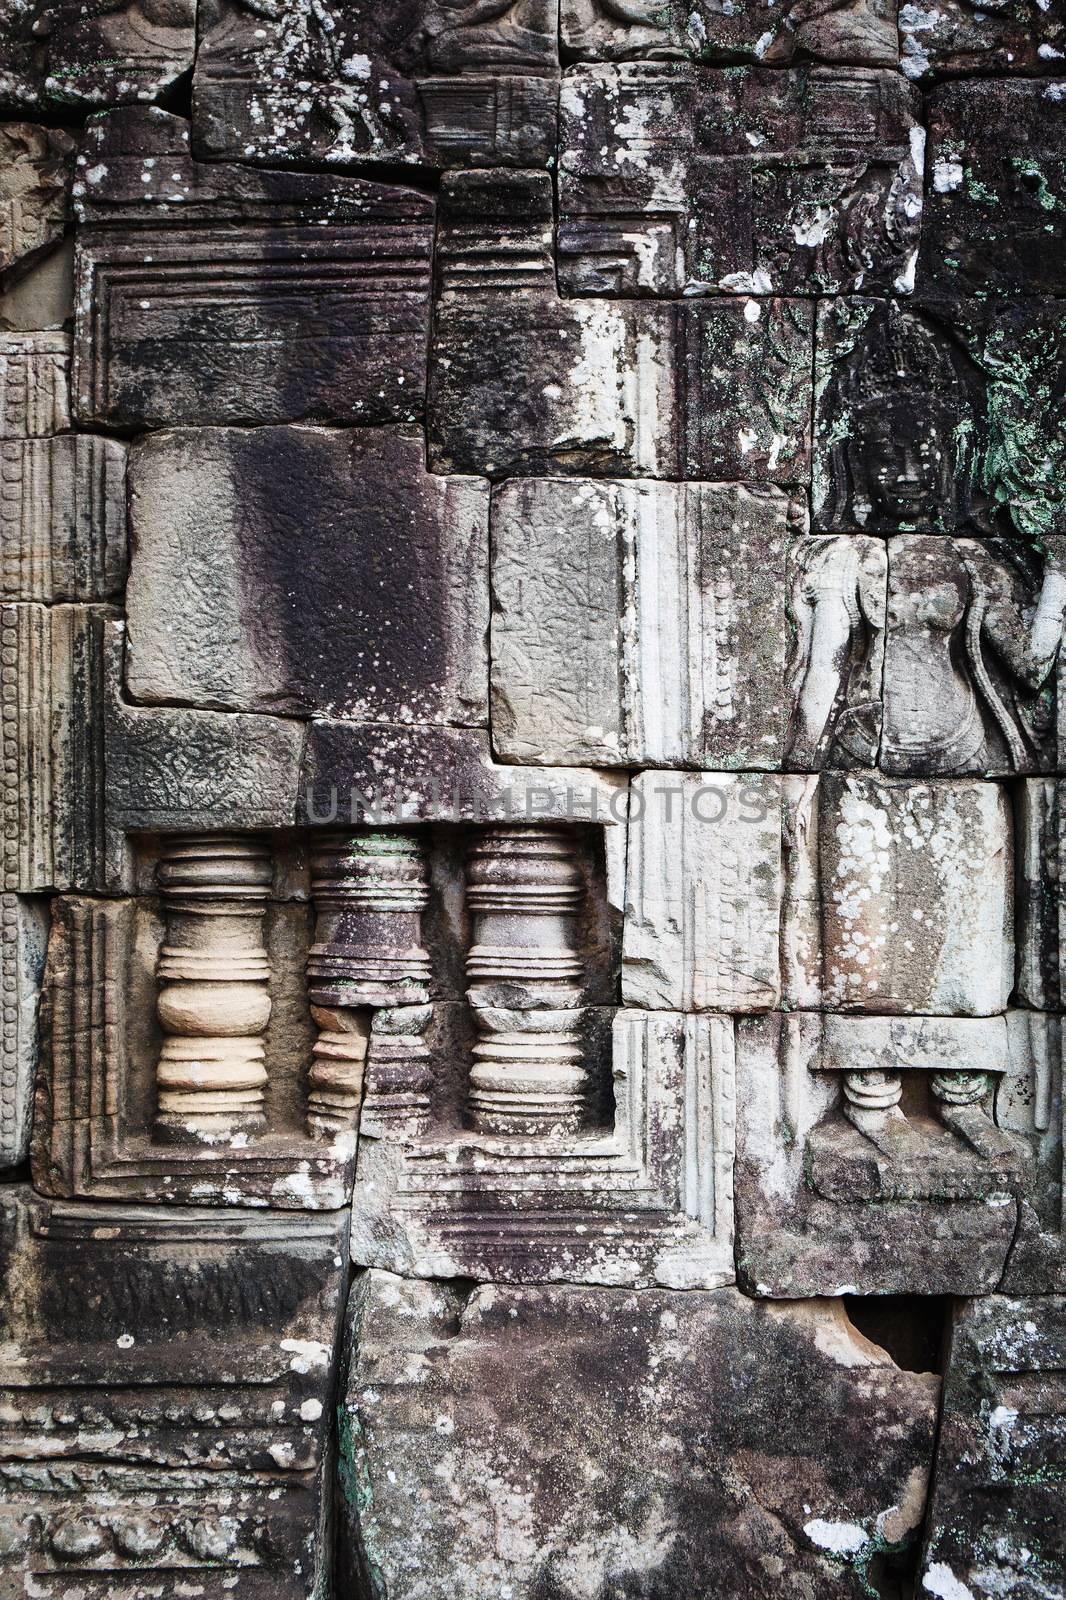 Cambodian temple ruins by gorov108